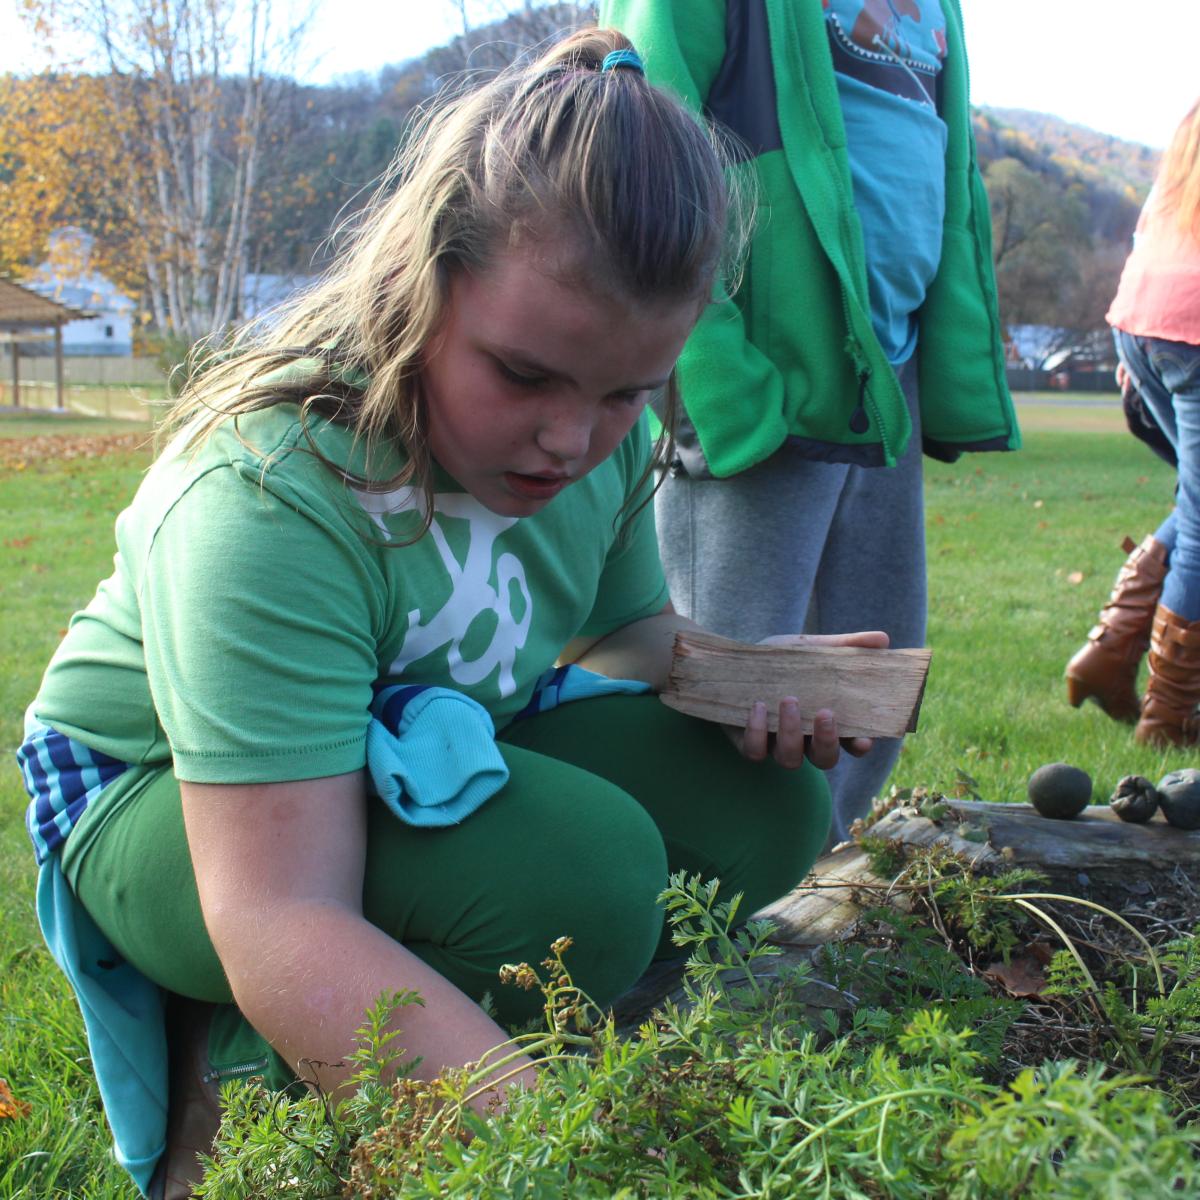 A Sharon Elementary School student harvests in the school gardens.